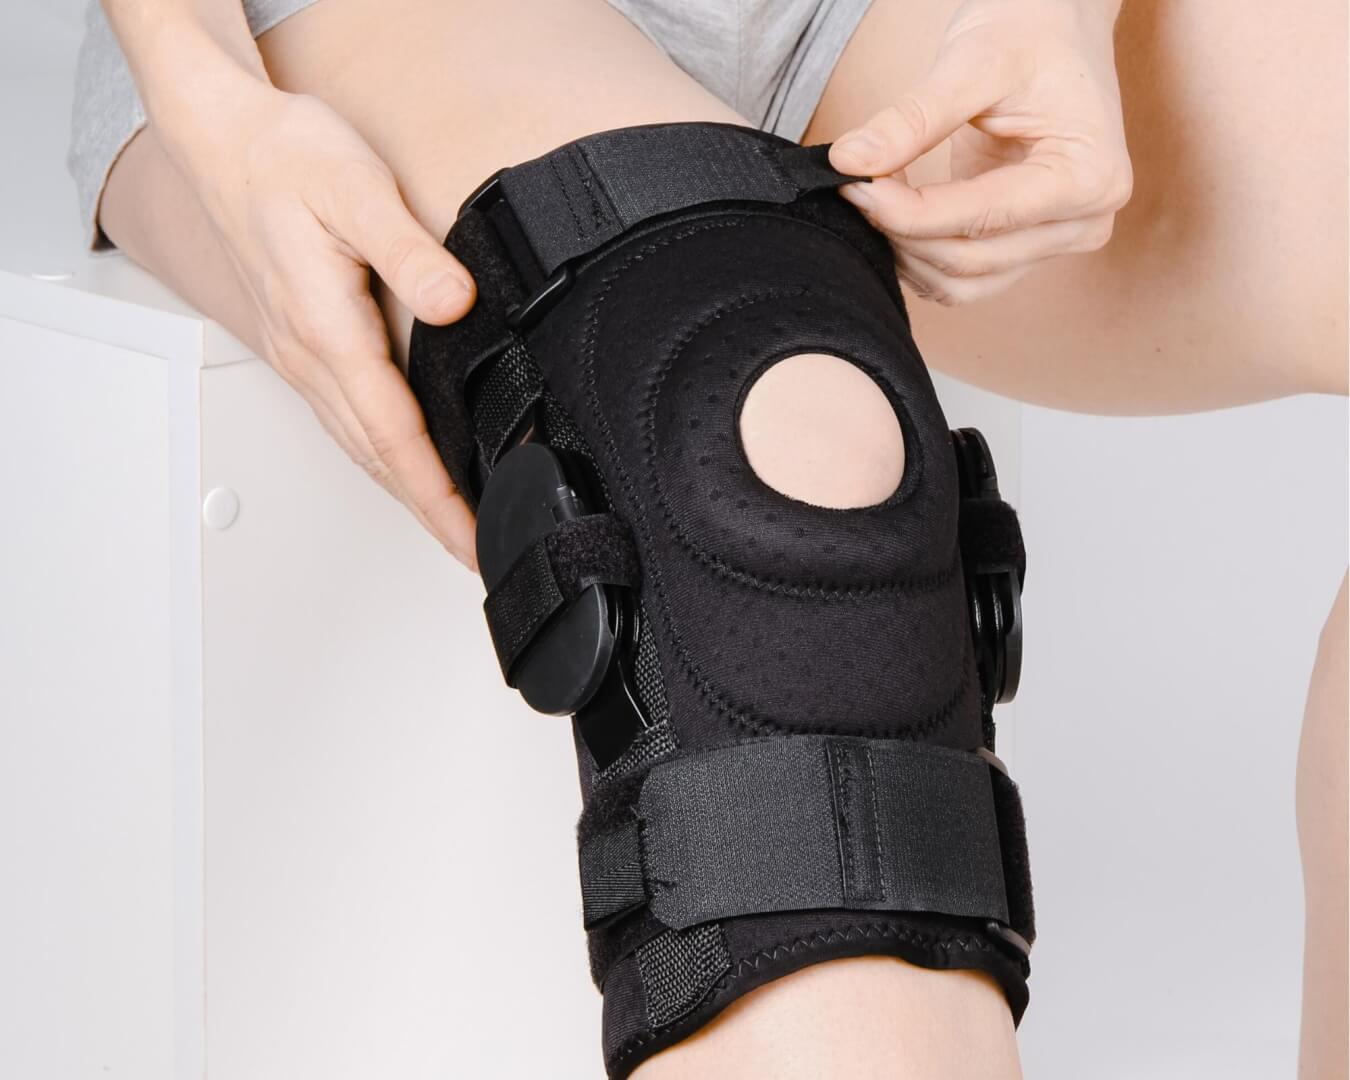 Signs That You May Need a Knee Brace - LiveWell Health and Physiotherapy